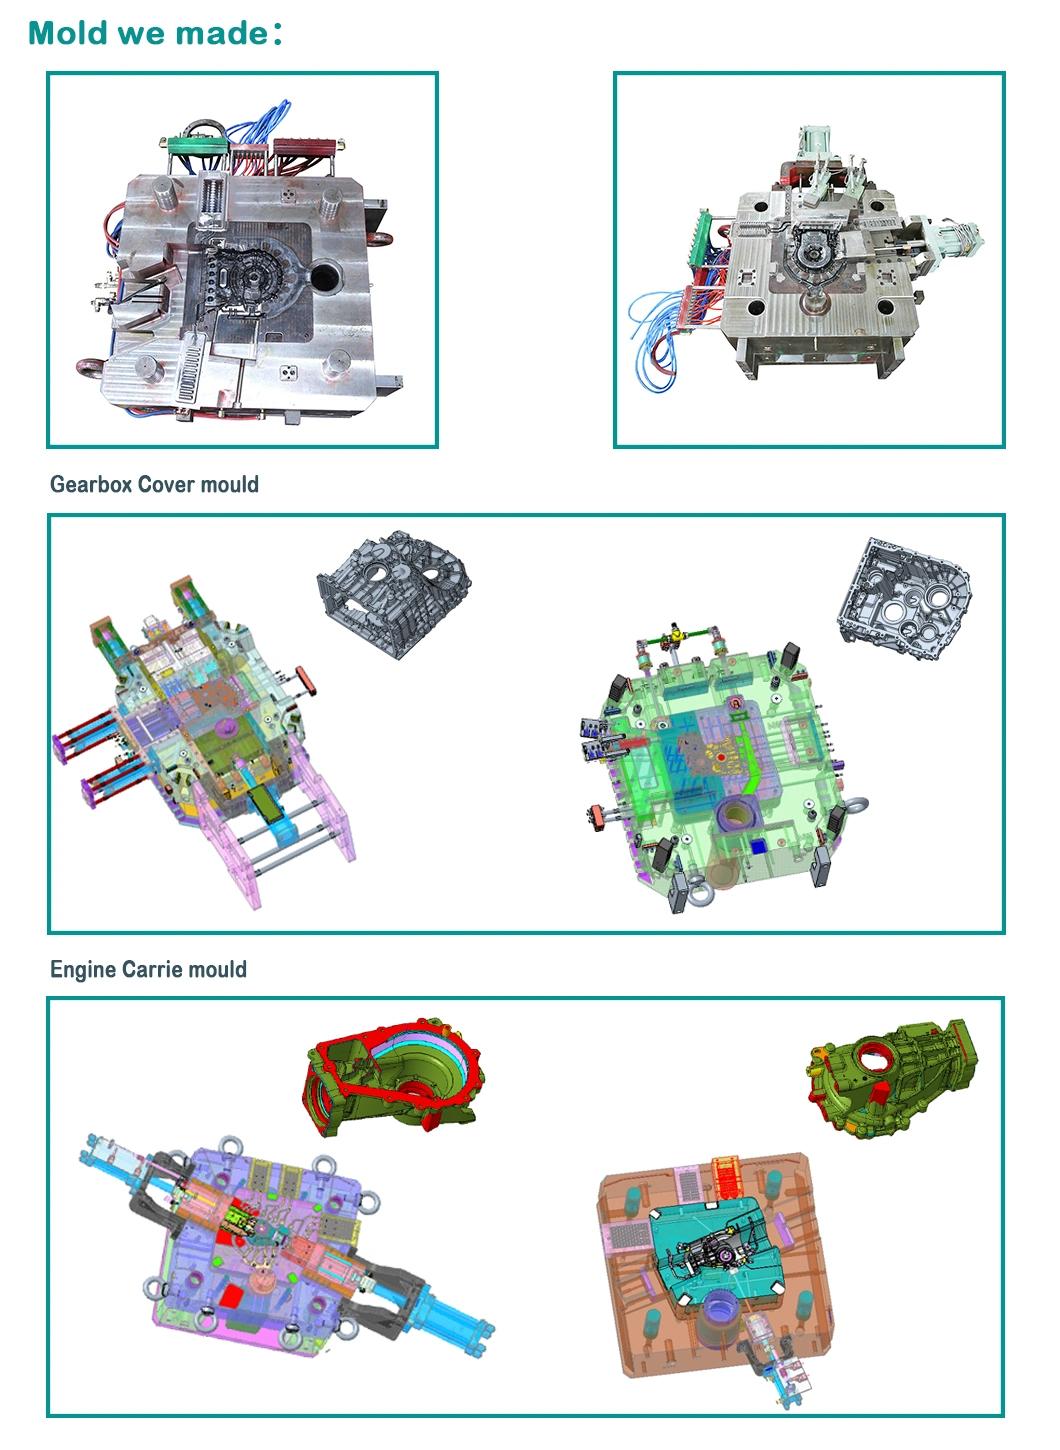 OEM Fast Design Advanced Processing Machines Custom Mould Alumnium Alloy Die Casting Parts Molds for Automotive Parts Engines System Steering System